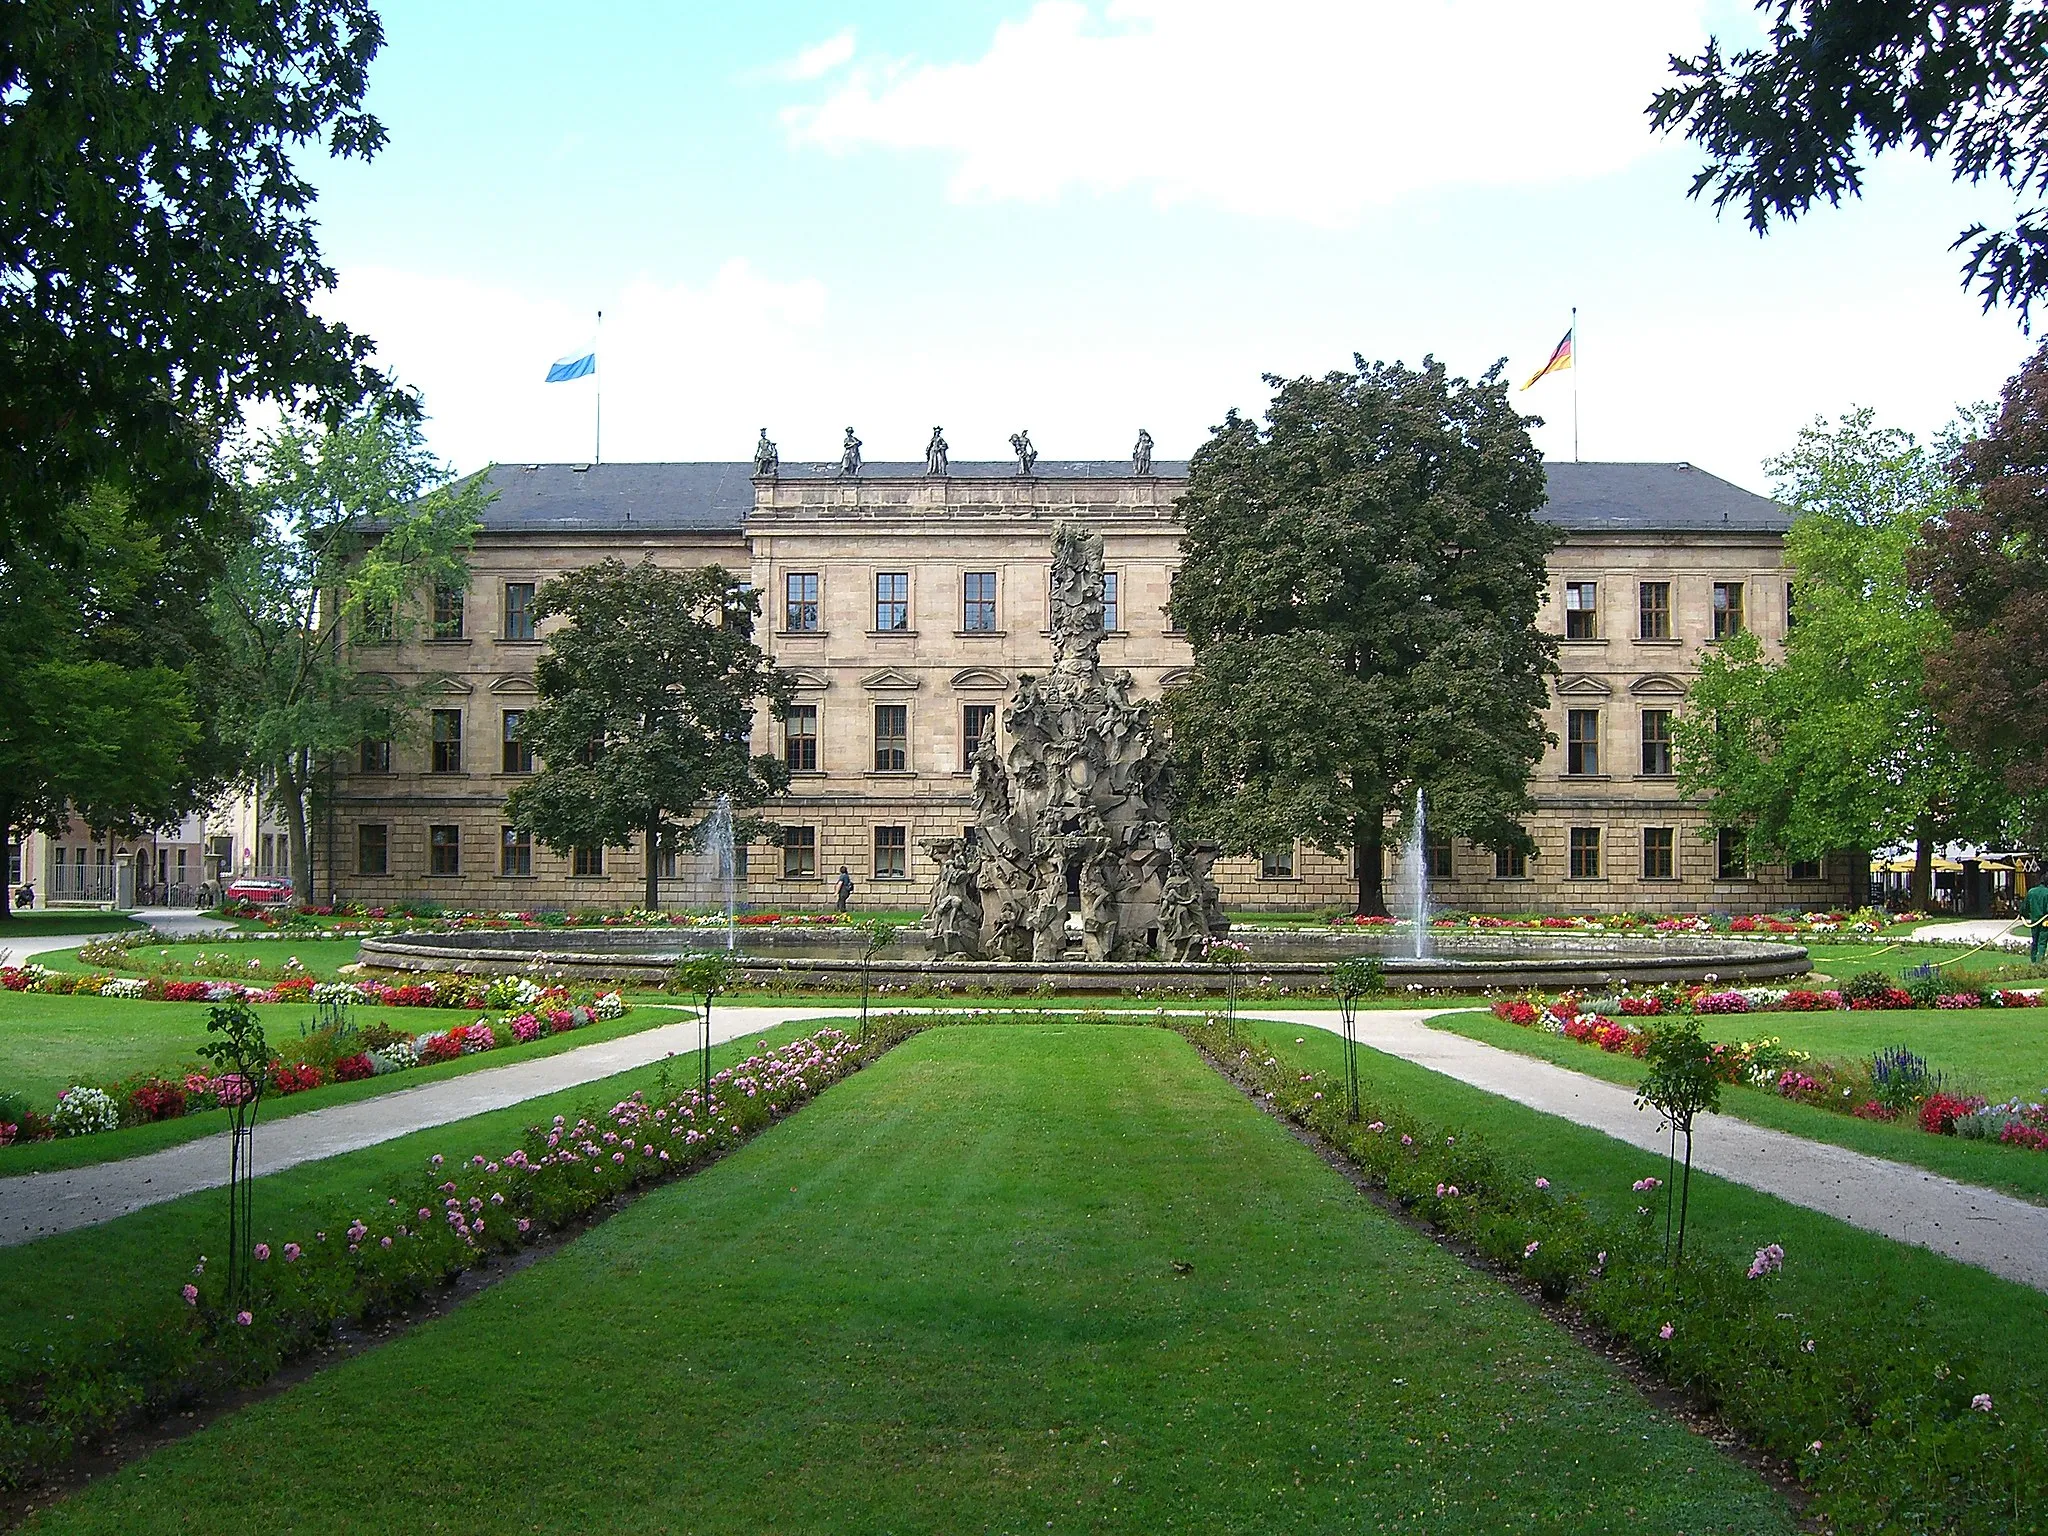 Photo showing: Backside of the manor-house of Erlangen, Germany, viewed from the Schlosspark.